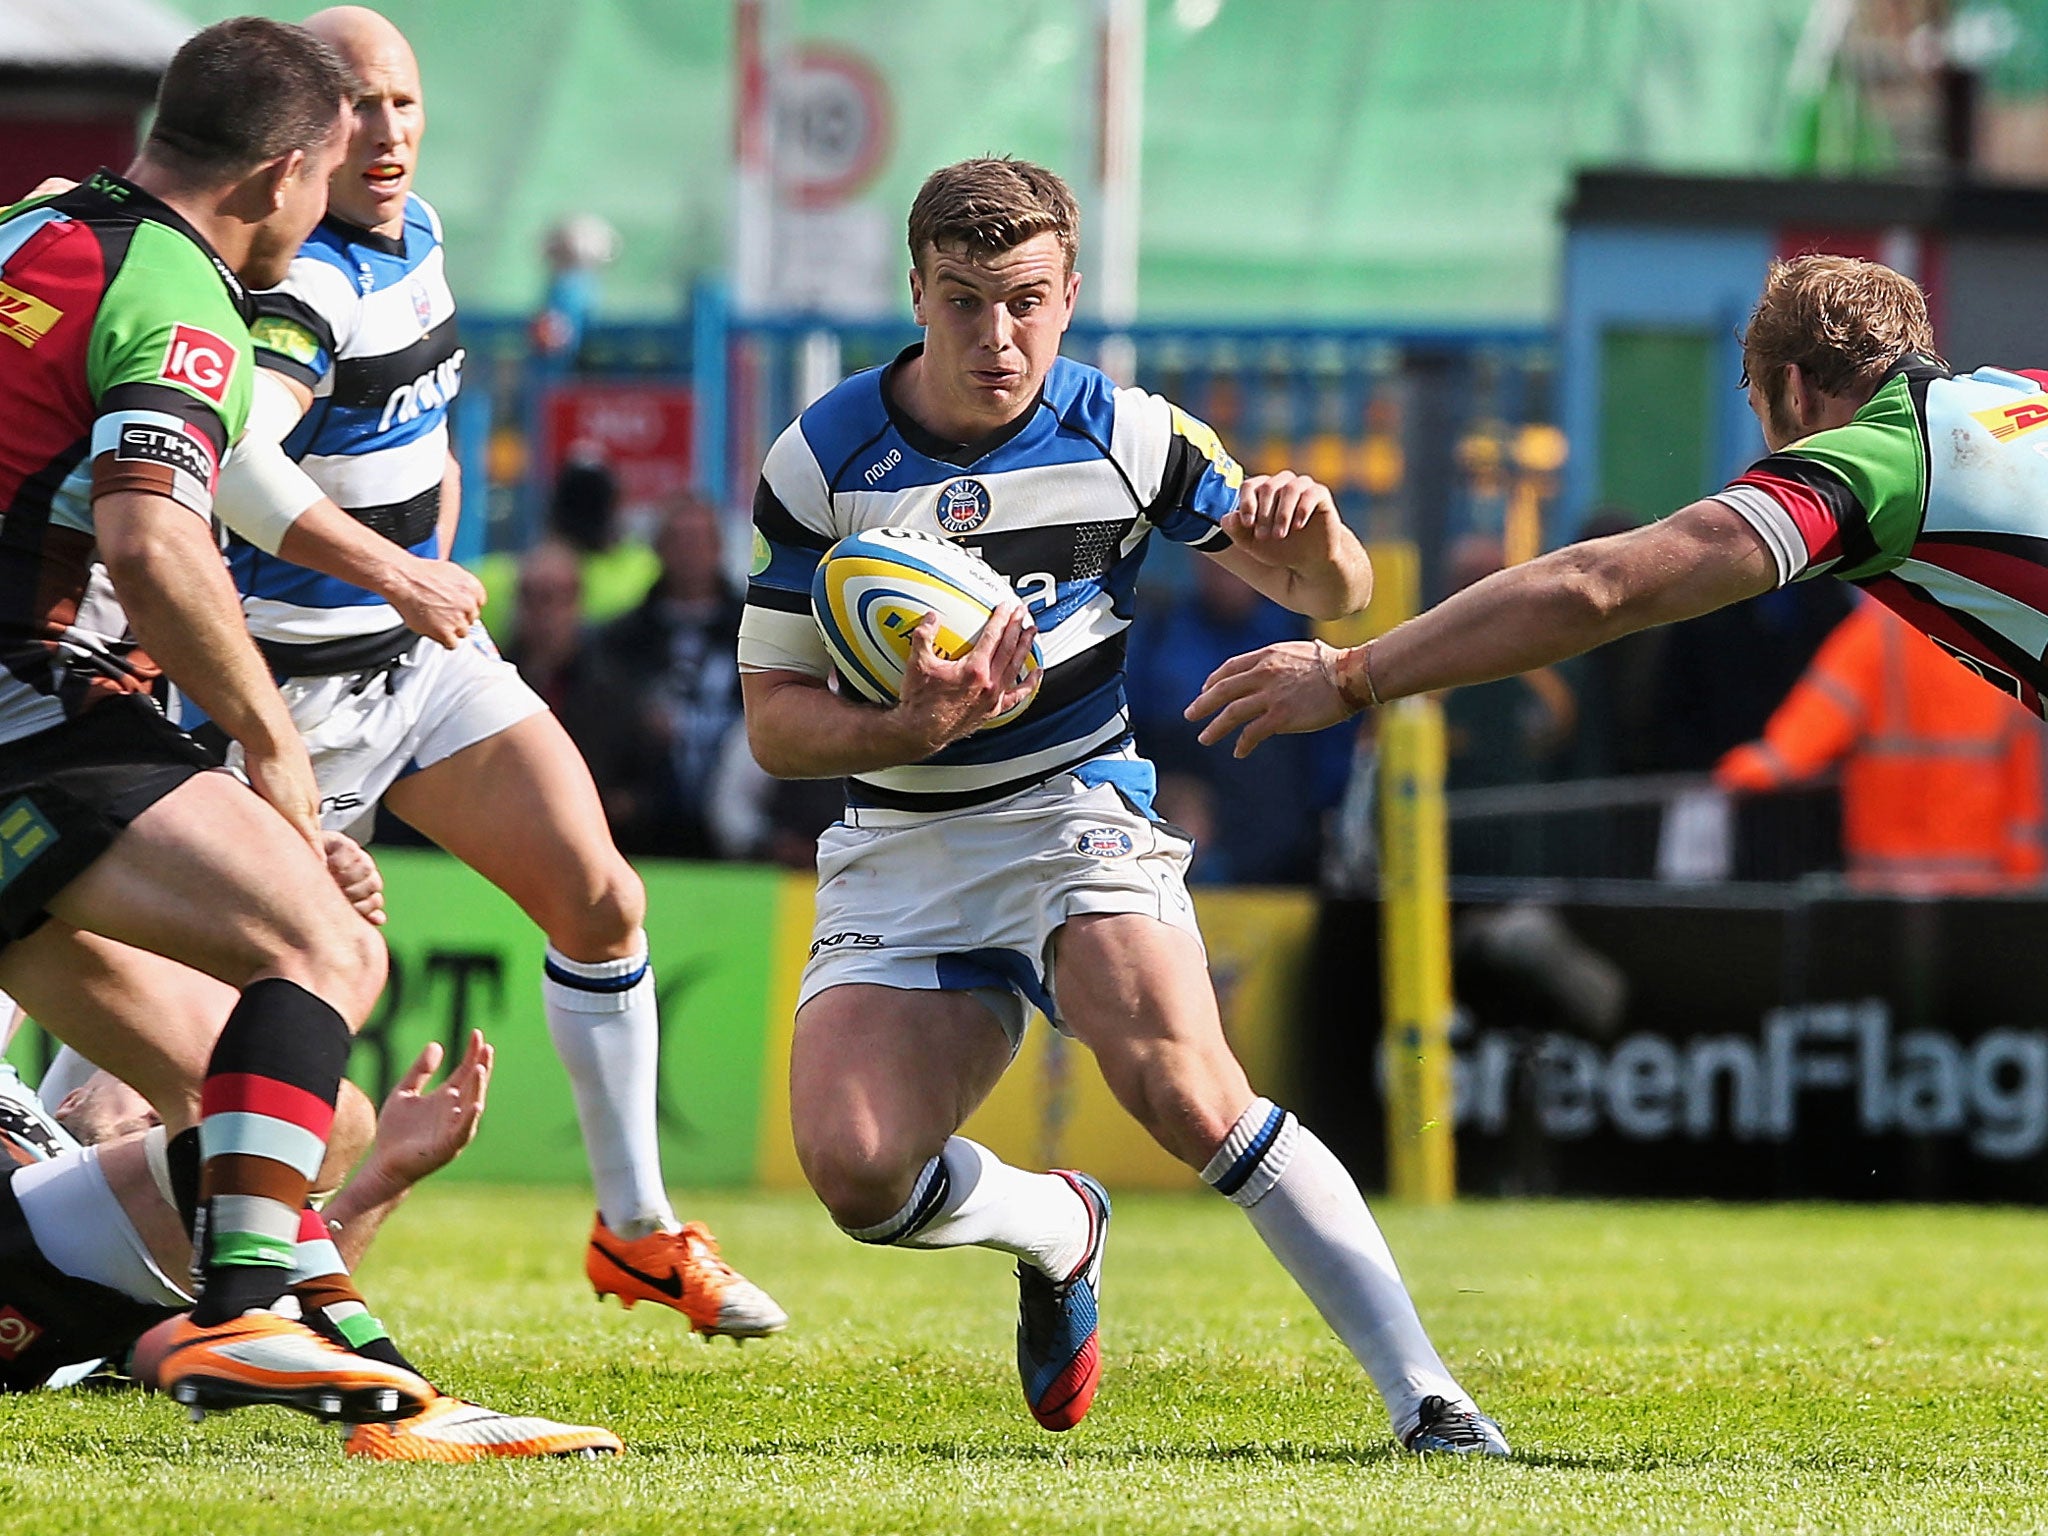 George Ford, the Bath outside-half, makes a break against Harlequins at the Stoop on Saturday, but a 19-16 defeat meant that Quins and not the West Countrymen take their place in the play-offs